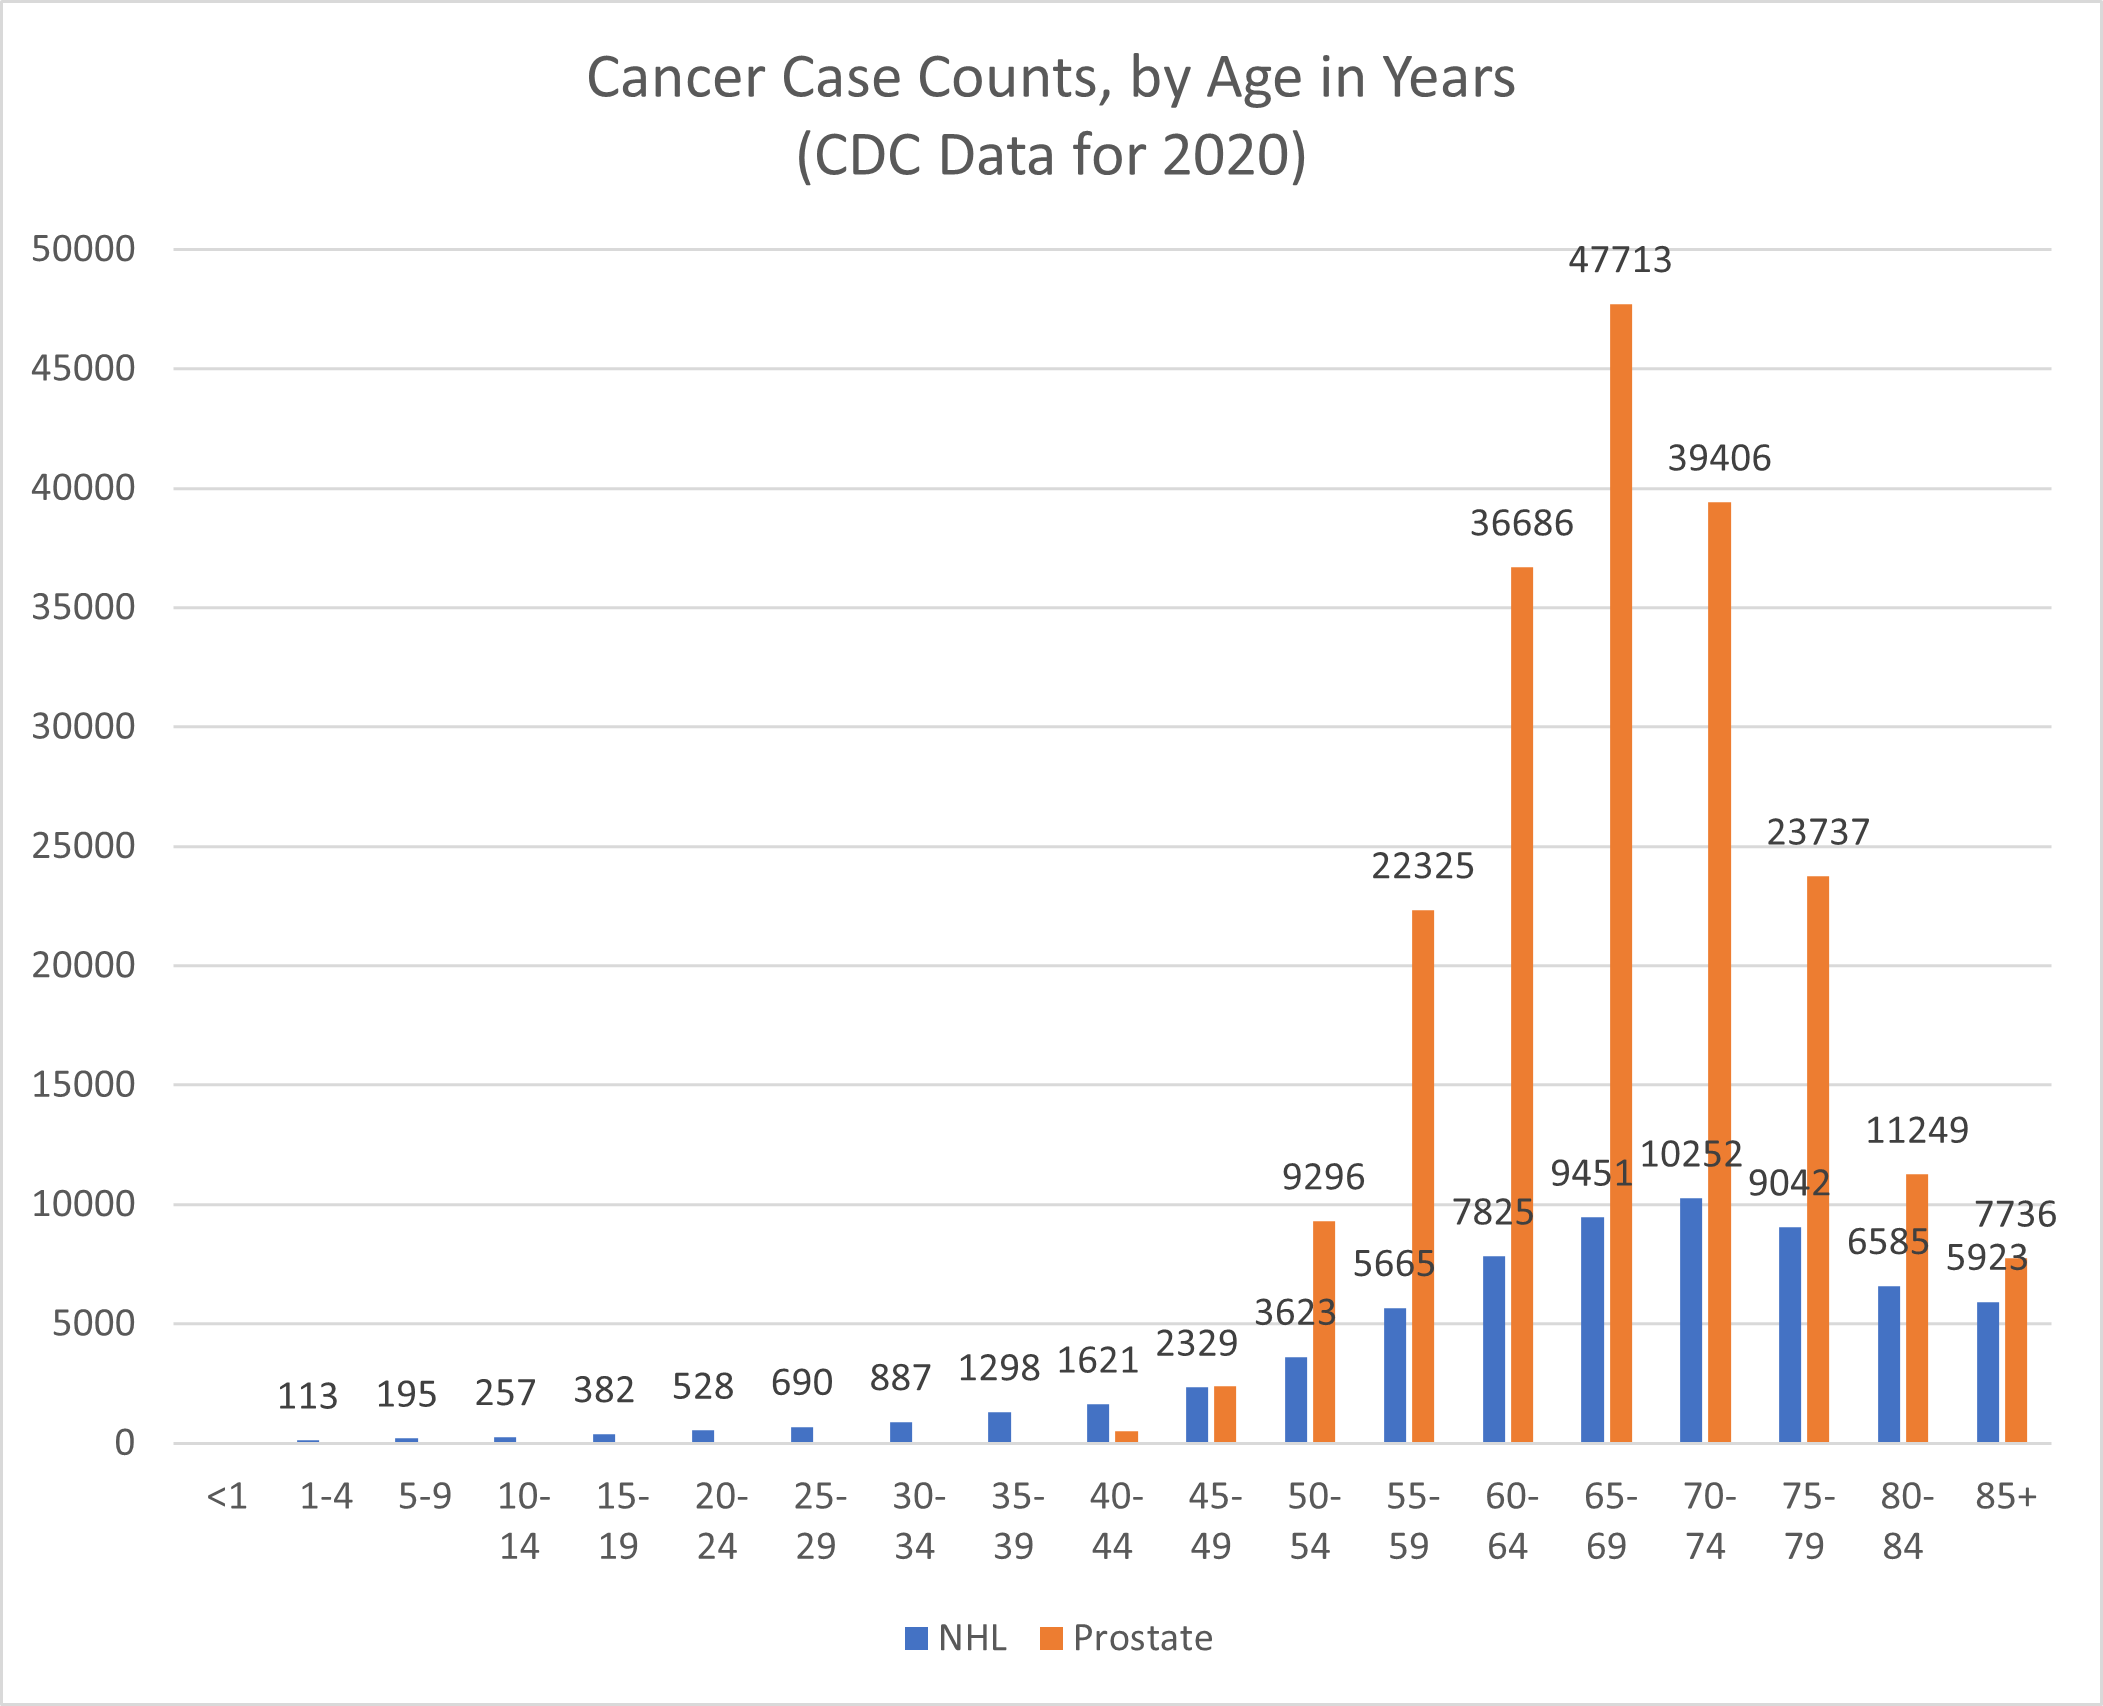 Graphic of Cancer Case Counts, by Age in Years (CDC Data for 2020)